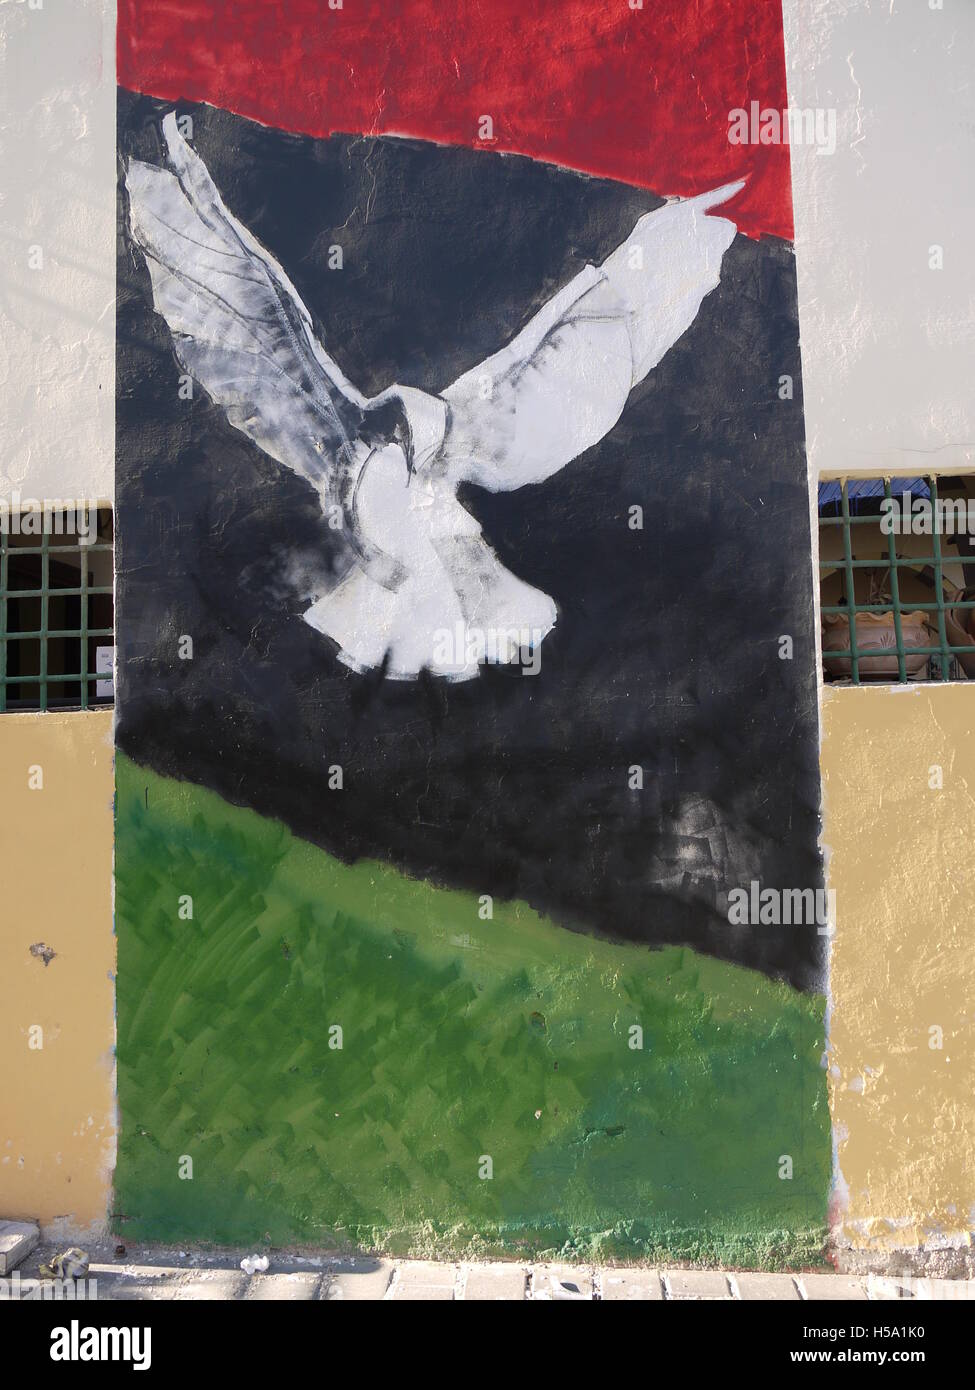 Painting on a wall of Tripoli celebrates the end of rebellion in Libya against regime of Muammar Gaddafi Stock Photo